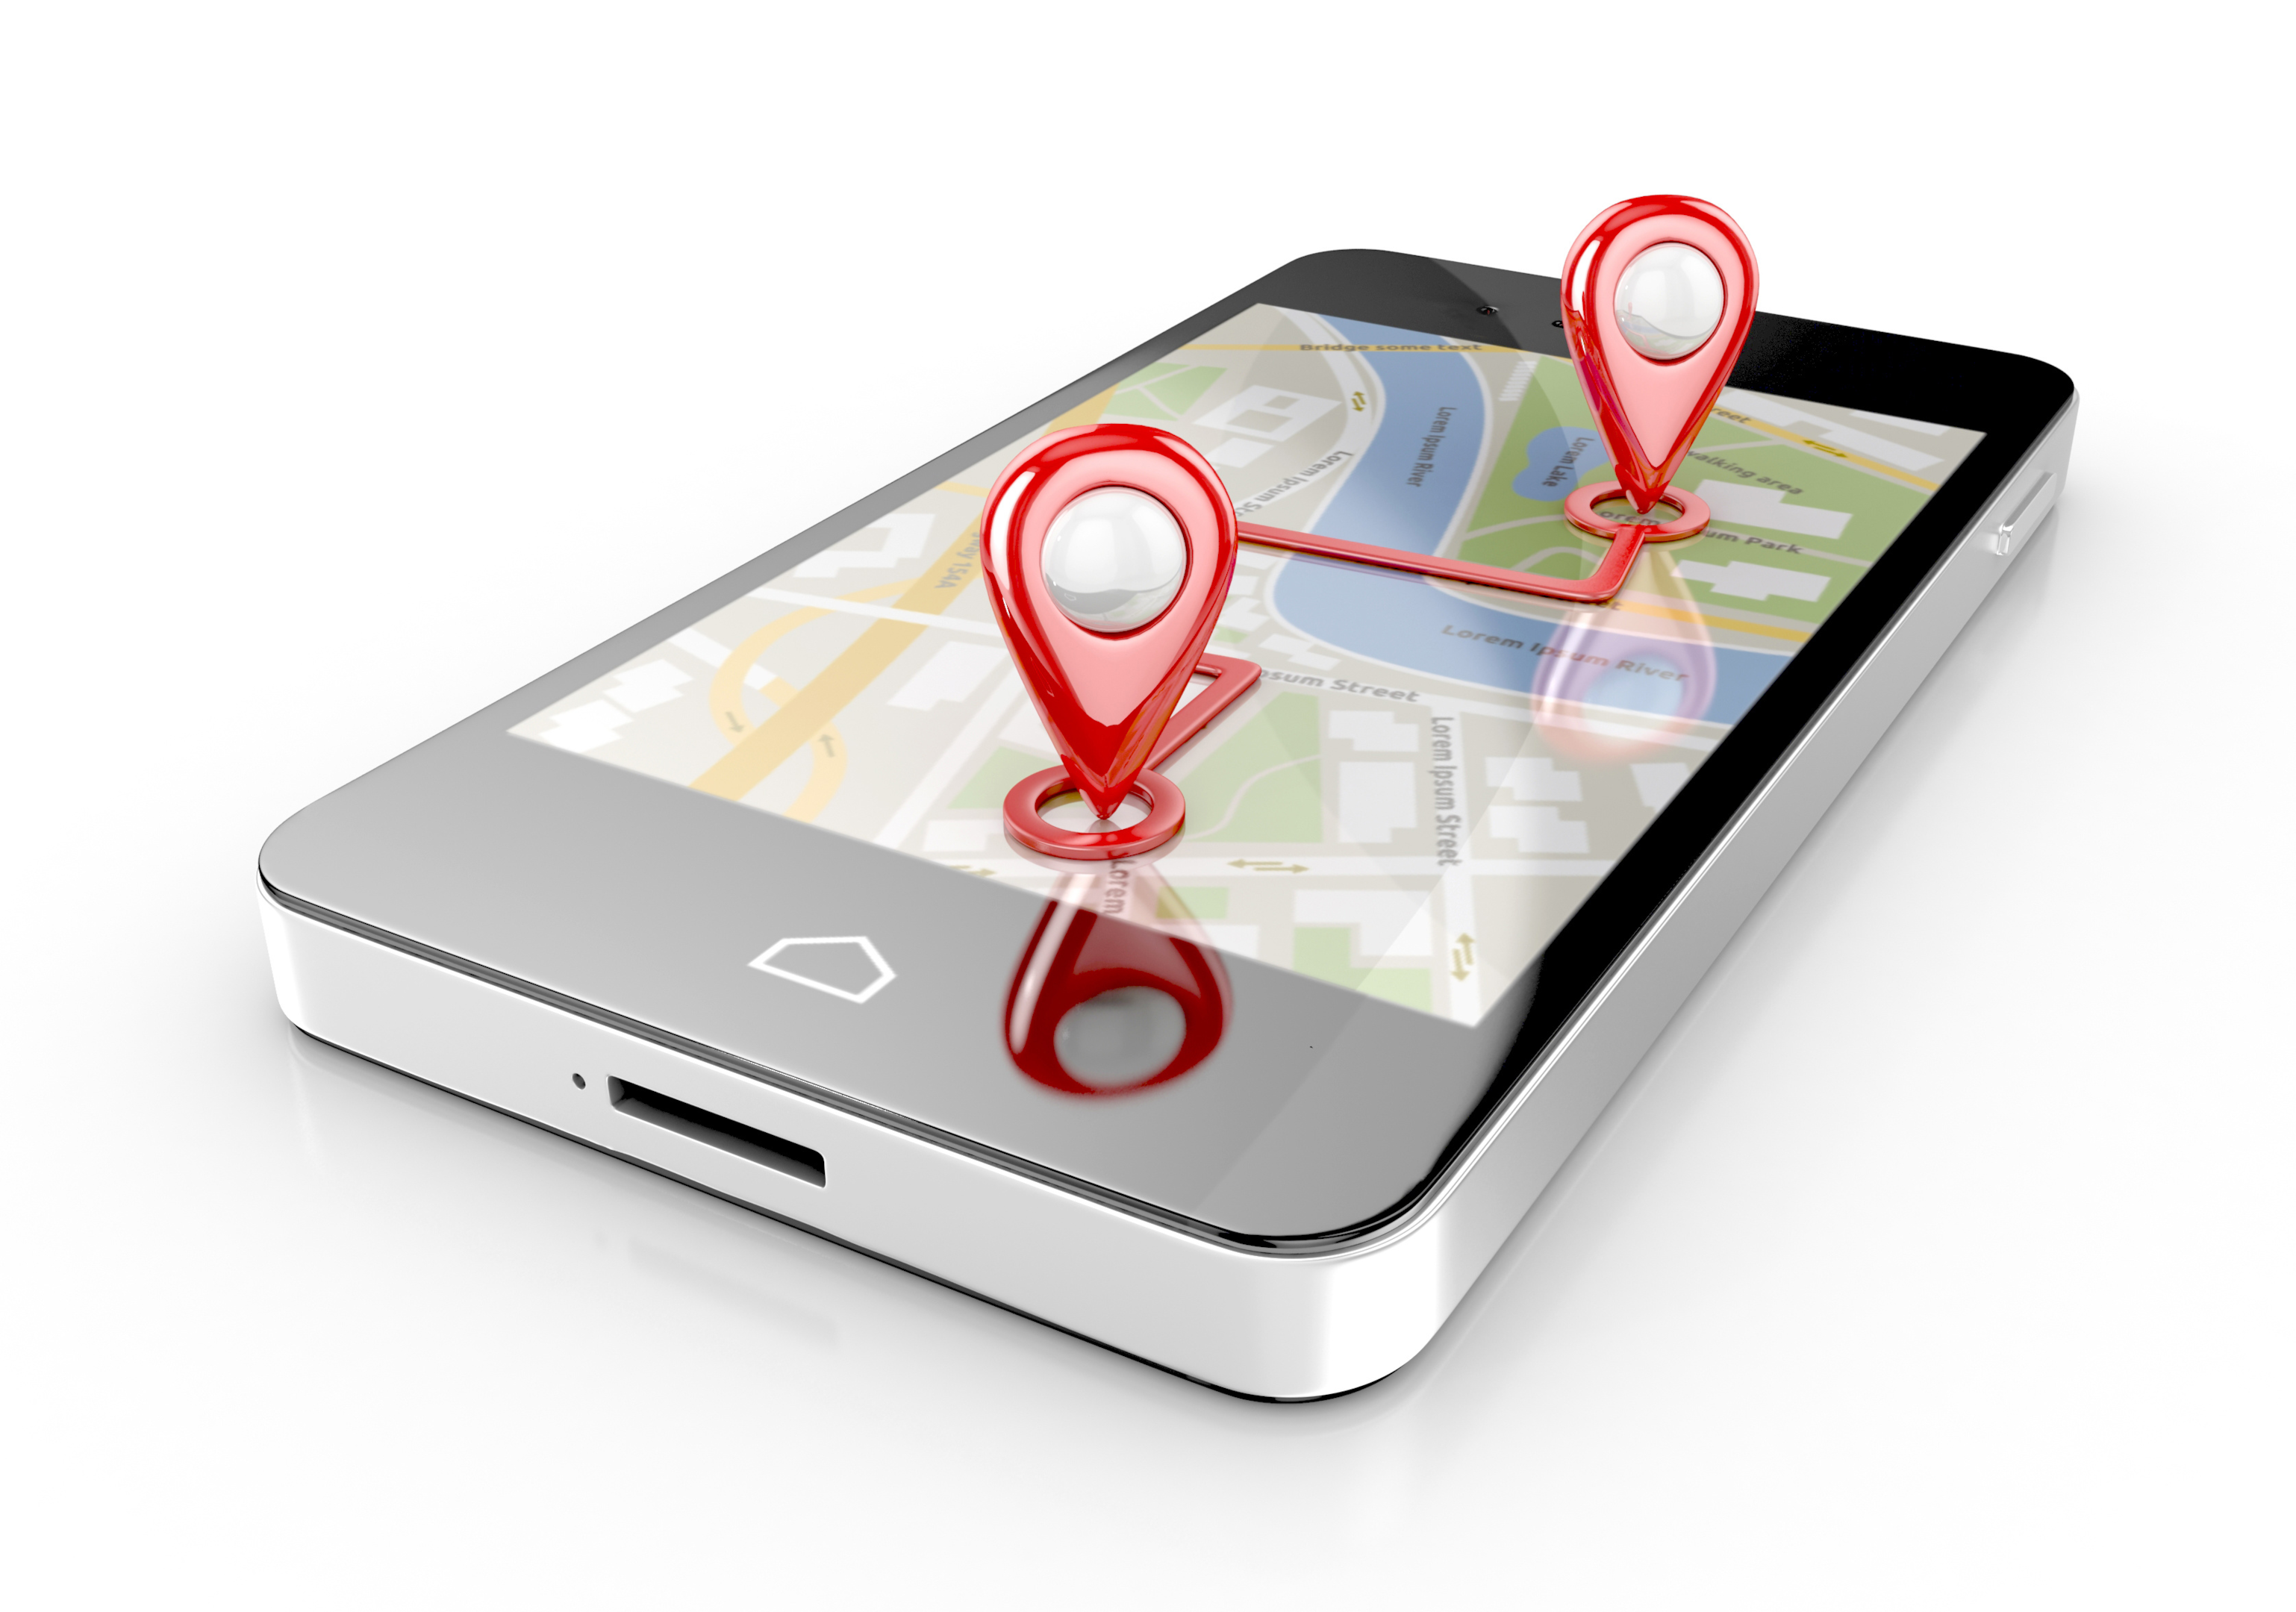 Scheduling software and gps tracking on a mobile device 